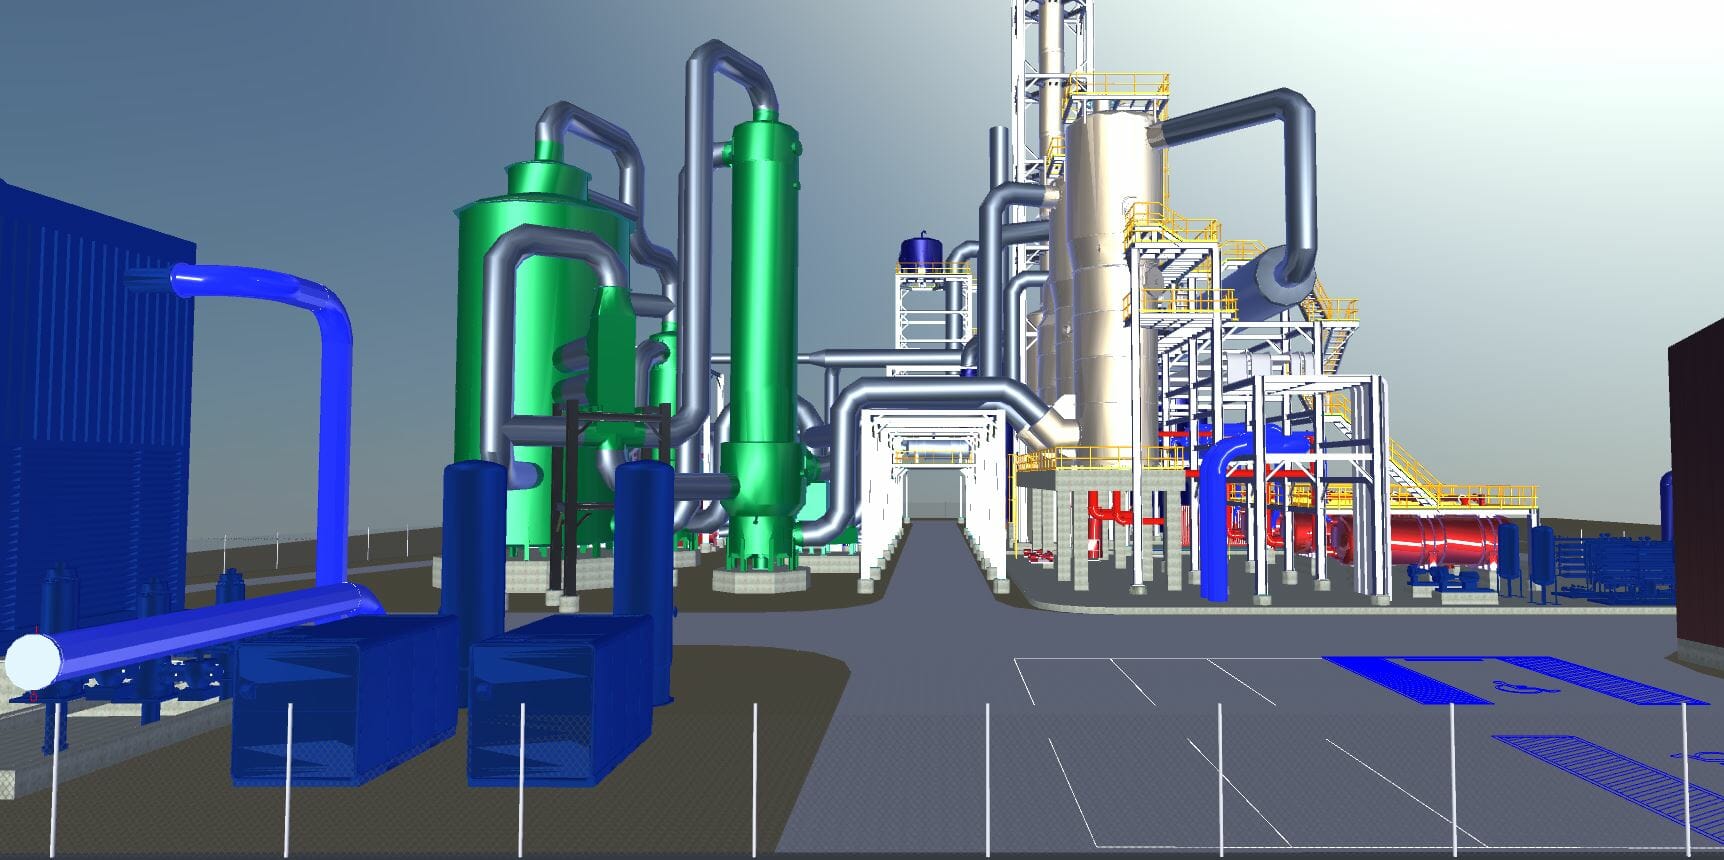 A 3d rendering of a factory with pipes and chemicals.